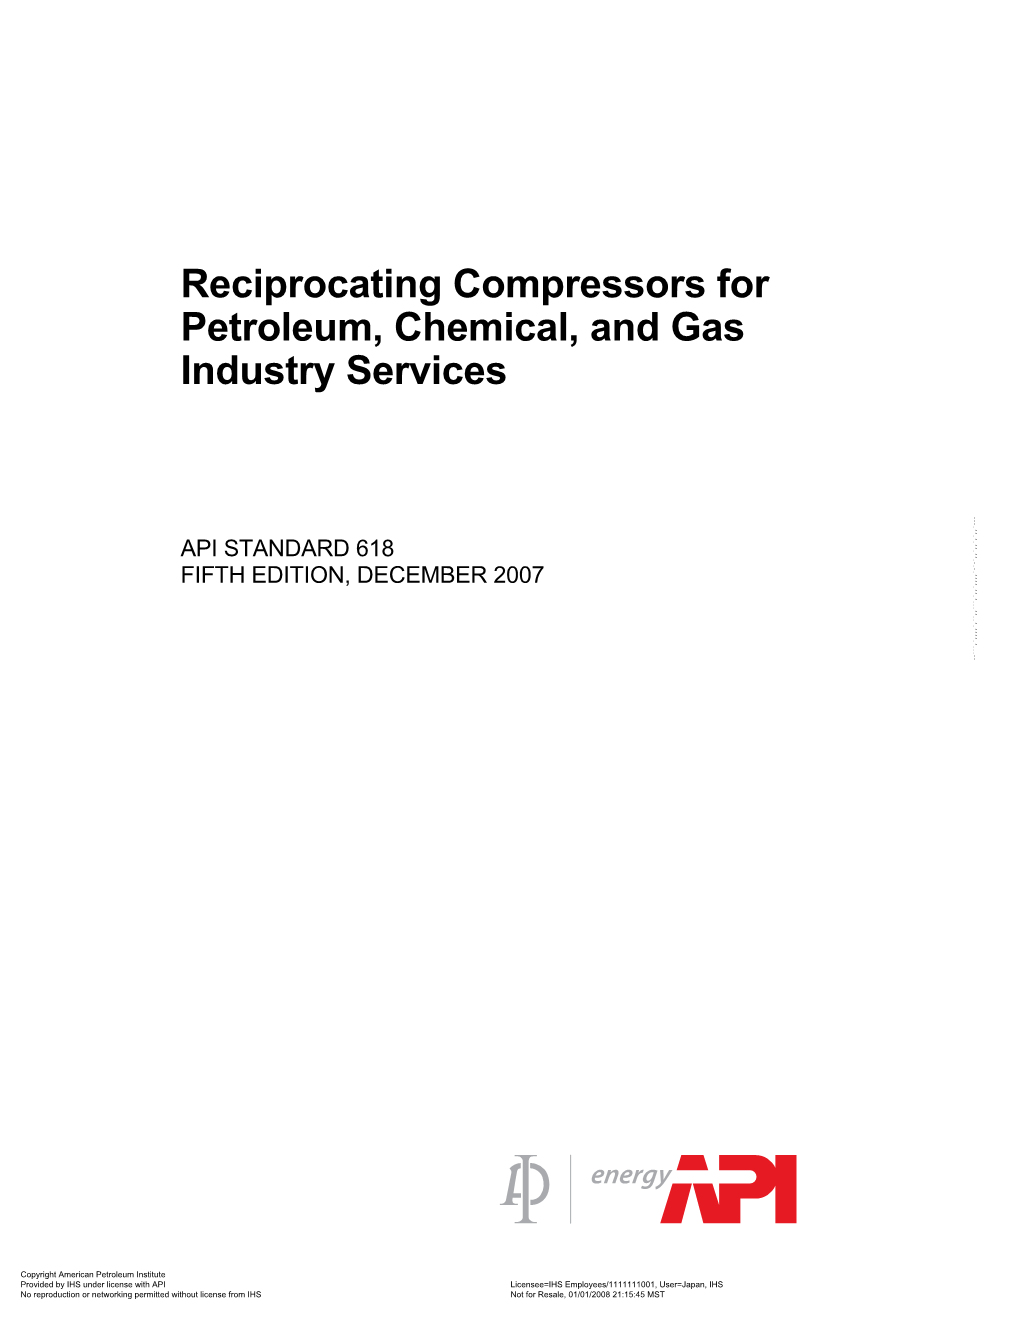 Reciprocating Compressors for Petroleum, Chemical, and Gas Industry Services